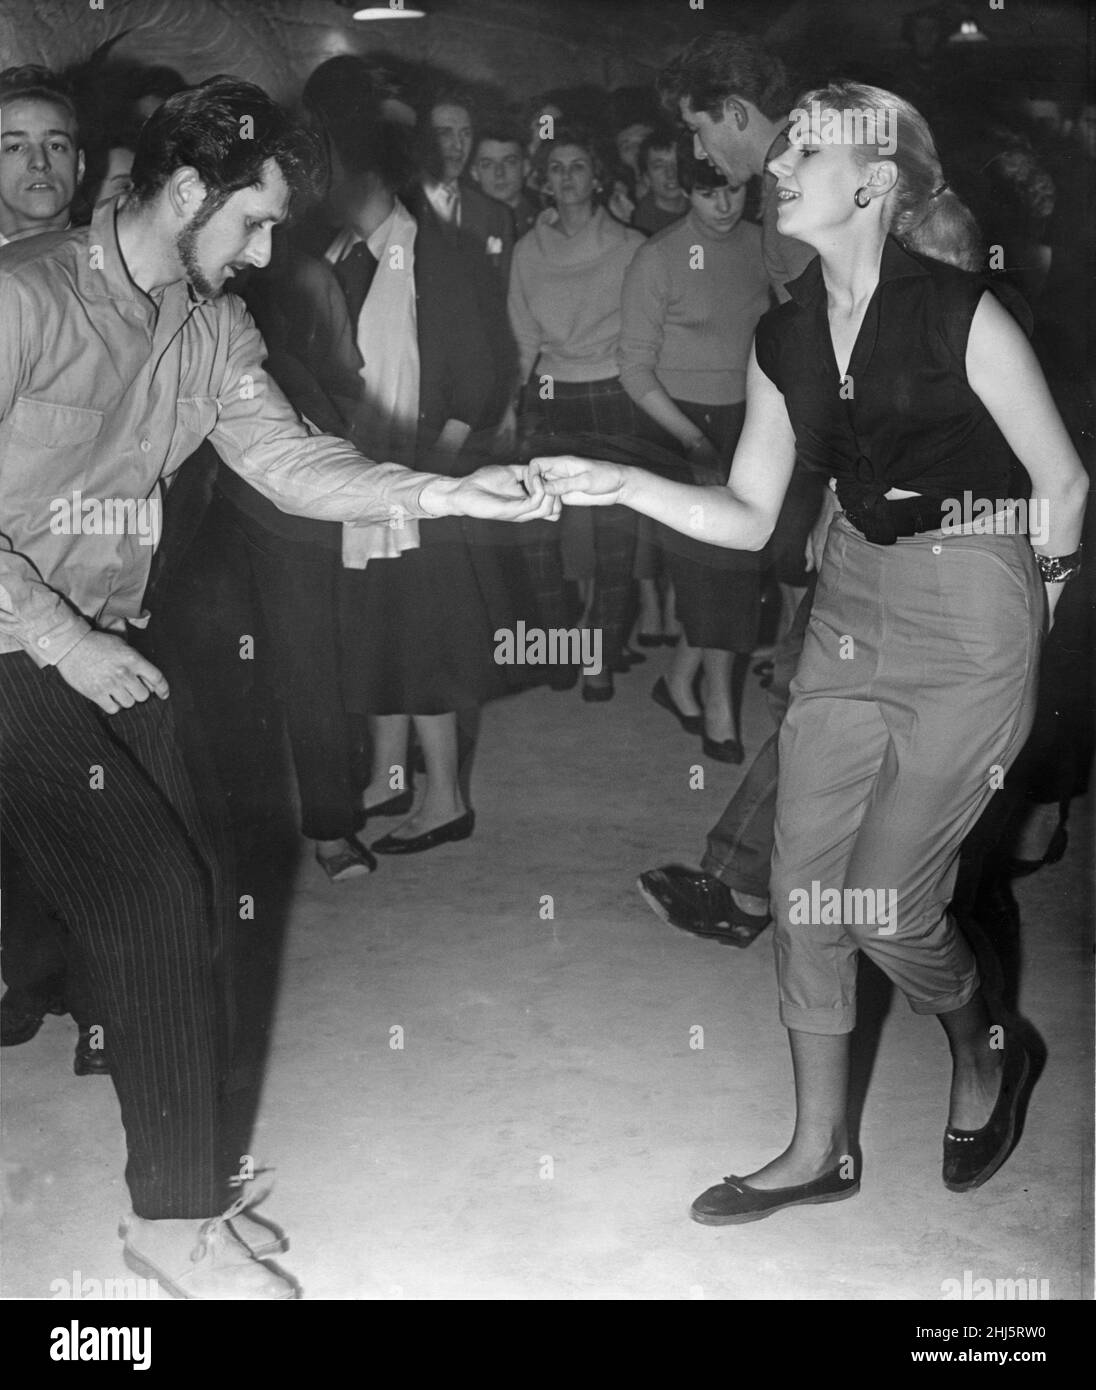 A couple dance the jive on the opening night of The Cavern Club in Liverpool, 15th January 1957. The Cavern Club is a nightclub at 10 Mathew Street, in Liverpool, England.  The original Cavern Club opened on Wednesday, 16 January 1957 as a jazz club, later becoming a centre of the rock and roll scene in Liverpool in the 1960s. The Beatles played in the club in their early years.  The original Cavern club closed in March 1973 and was filled in during construction work on the Merseyrail underground rail loop. Focus were the last band to play the original Cavern a few days before the club was shu Stock Photo